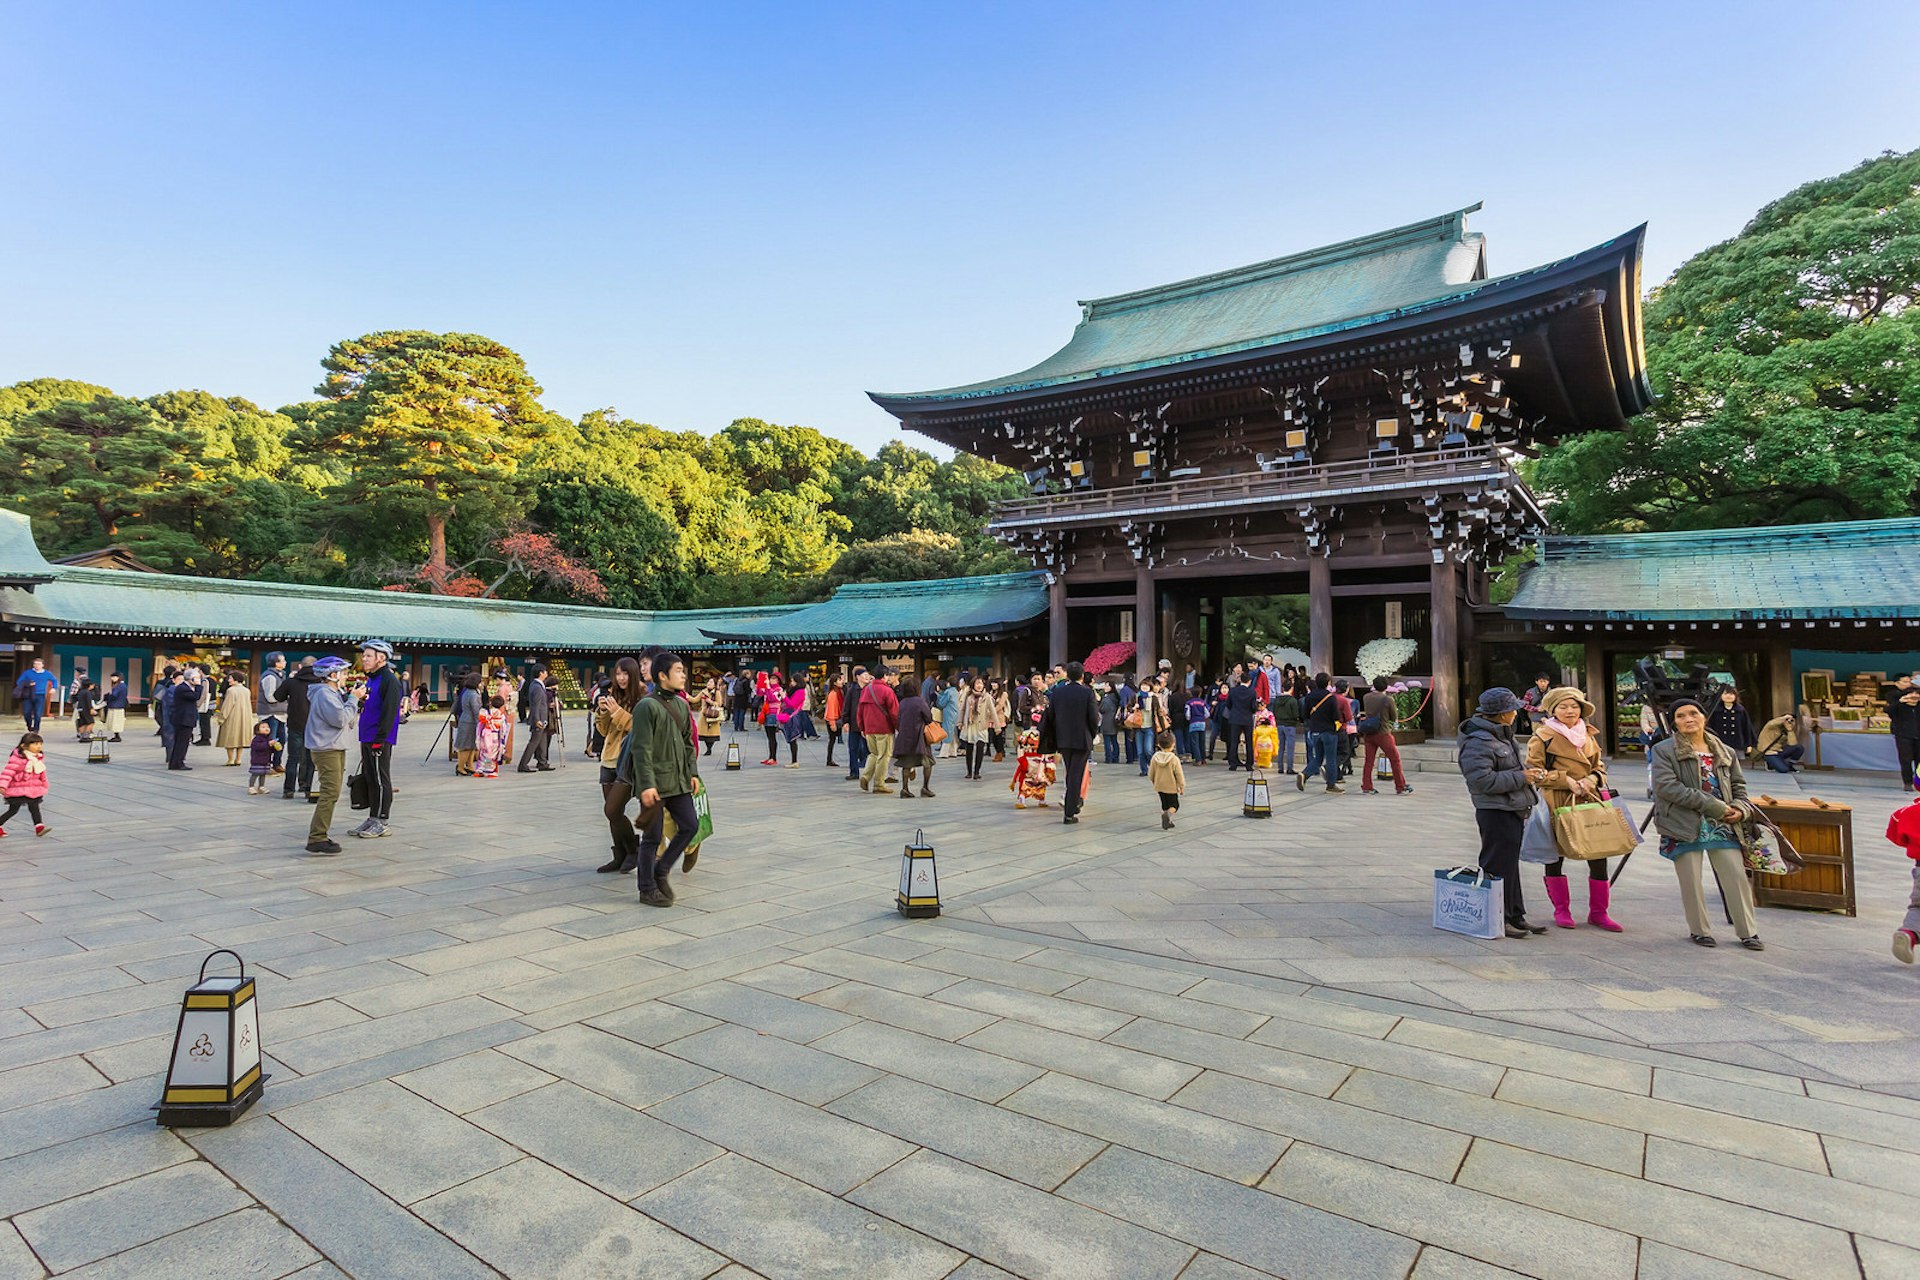 Meiji-jingū - a large wooden shrine in Tokyo with a sloping green roof. A crowd of people gather in the shrine's courtyard, with trees visible beyond the shrine's walls.